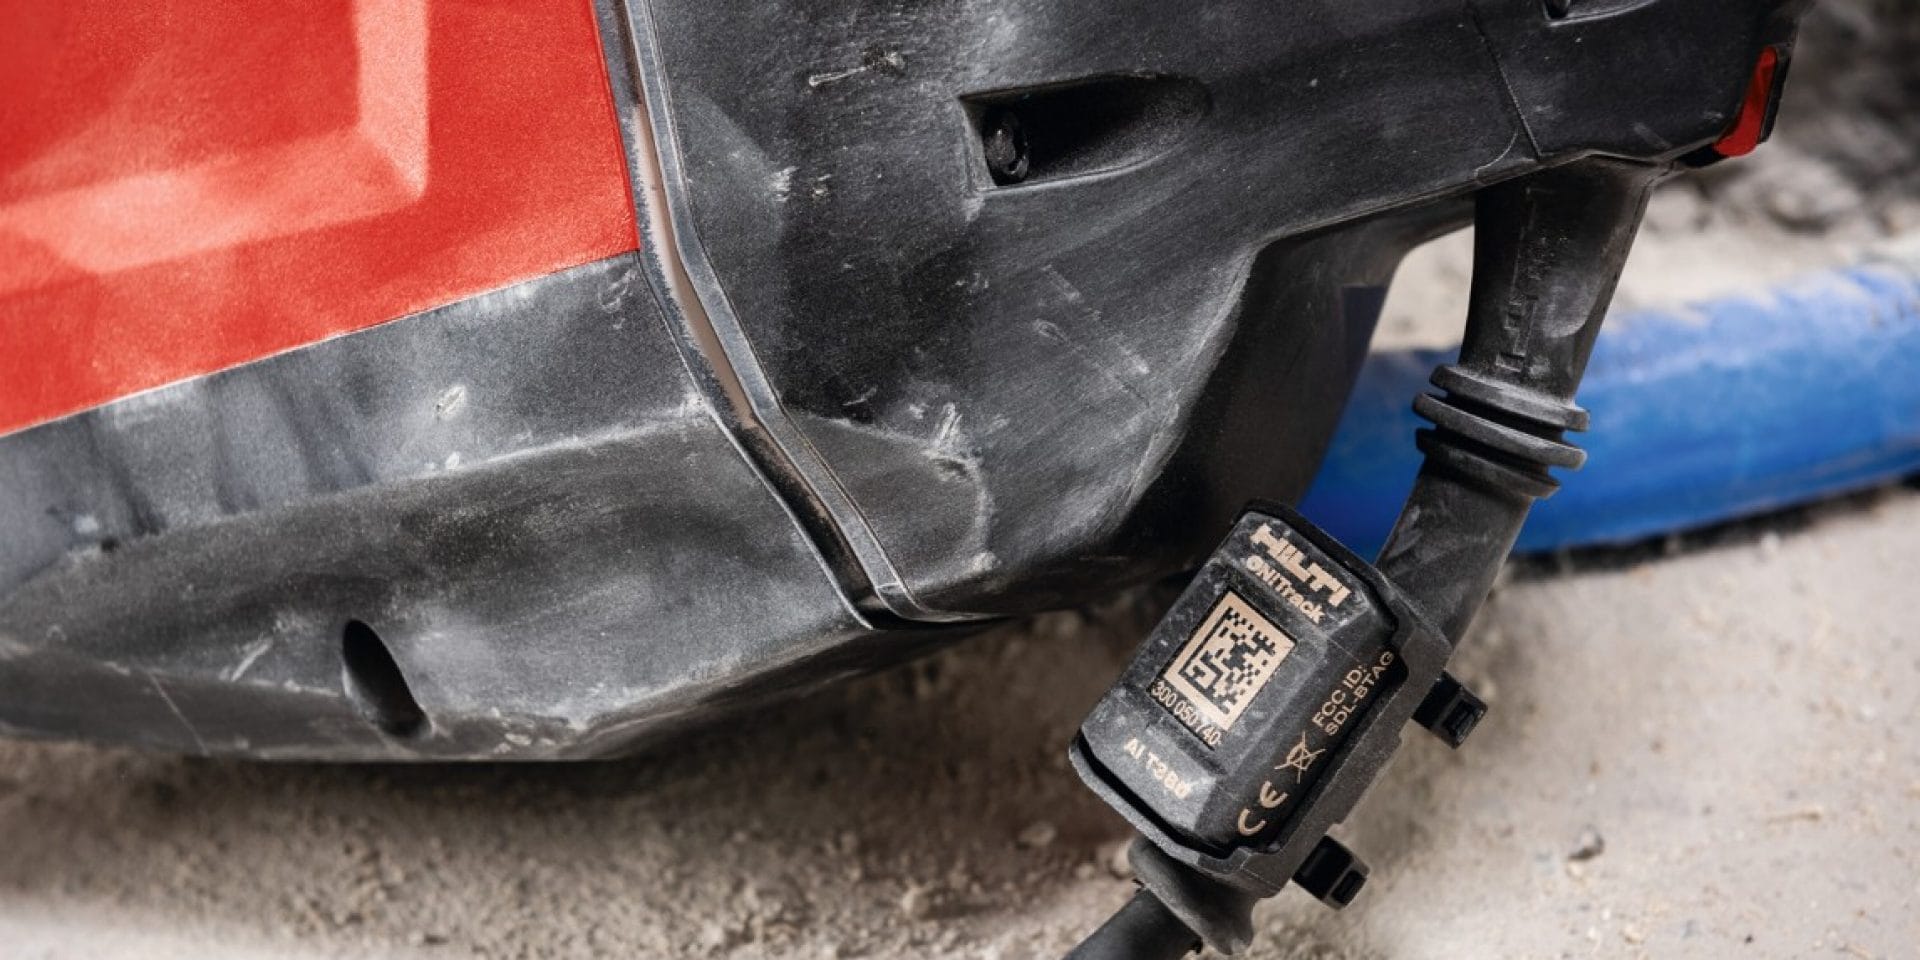 ON!Track robust tags are designed for the toughest jobsite conditions and tested to withstand corrosion, abrasion, impact and exposure to chemicals.